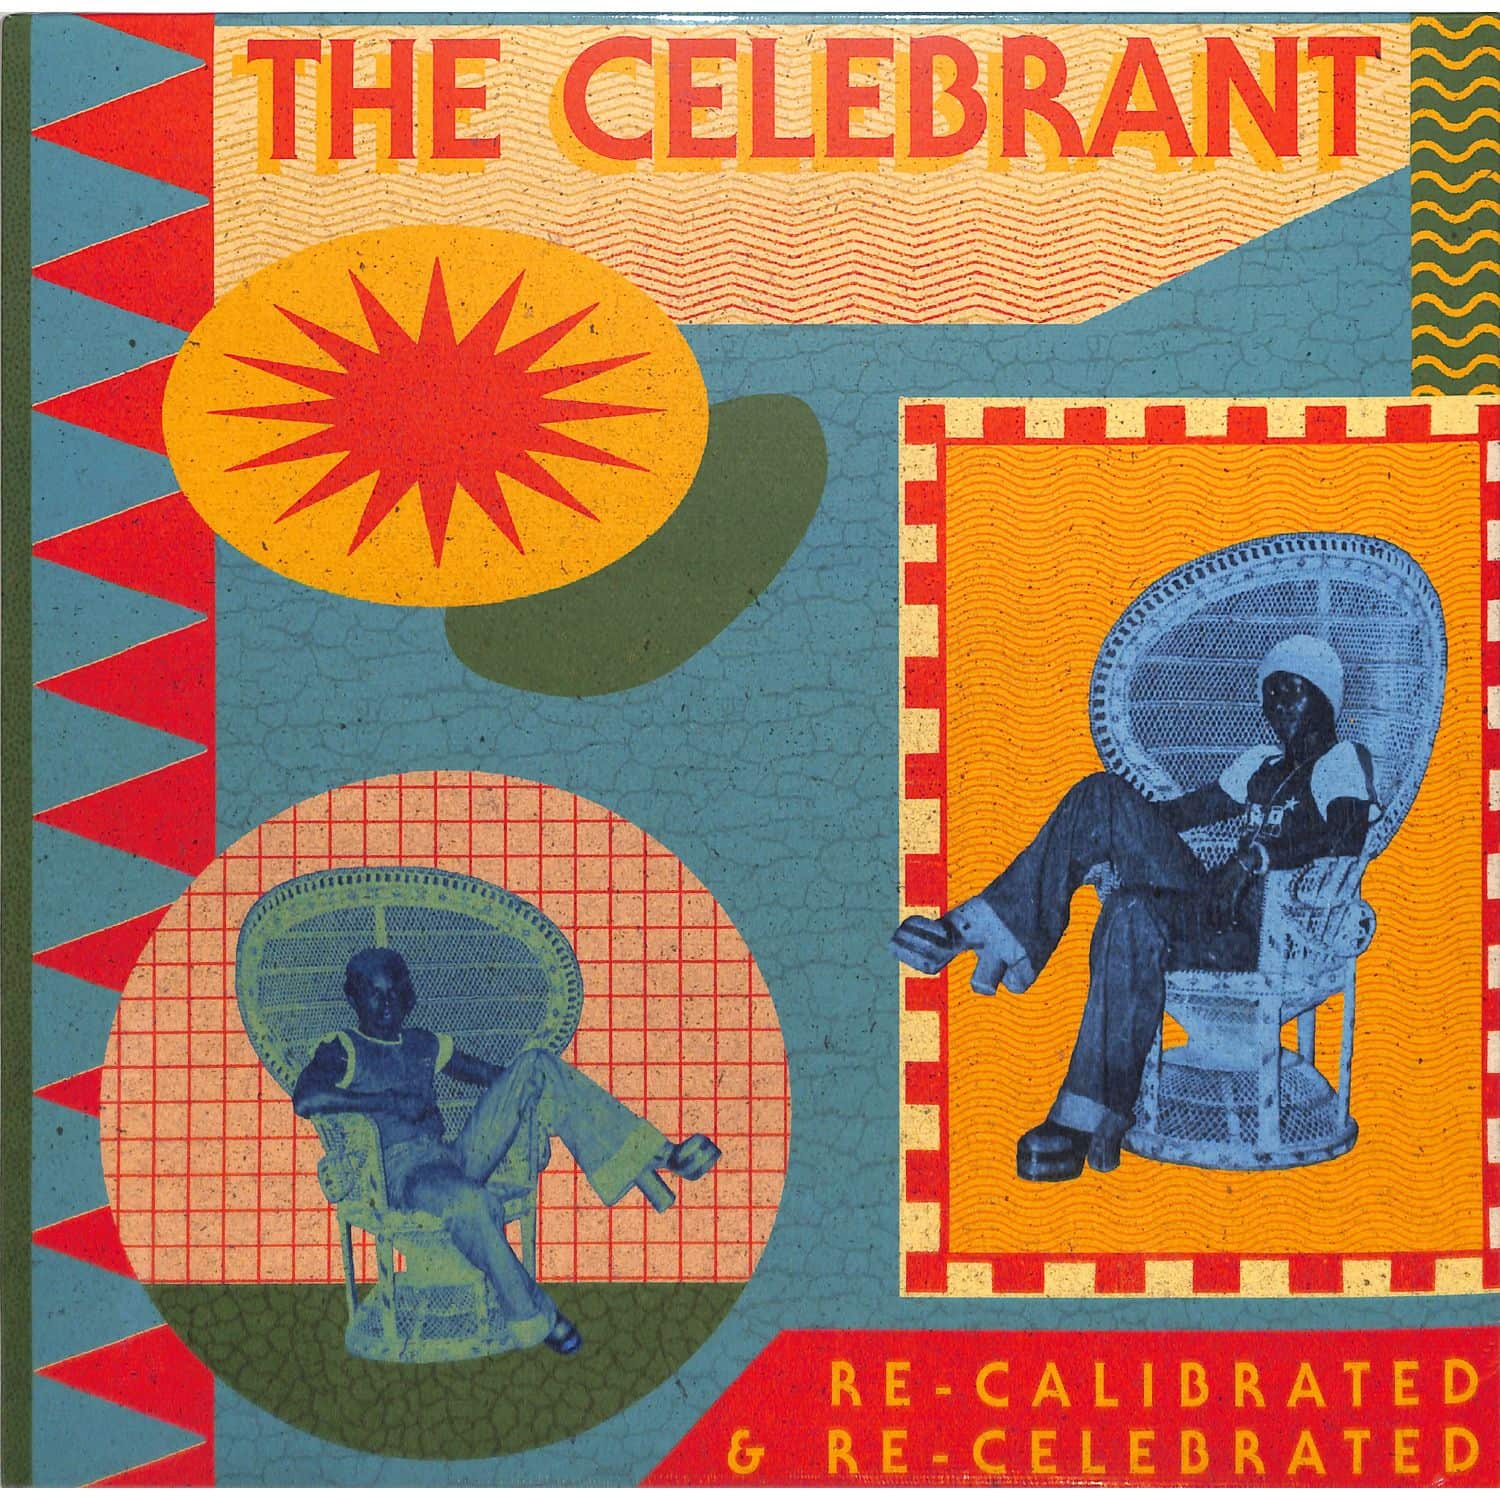 The Celebrant - RE-CALIBRATED & RE-CELEBRATED